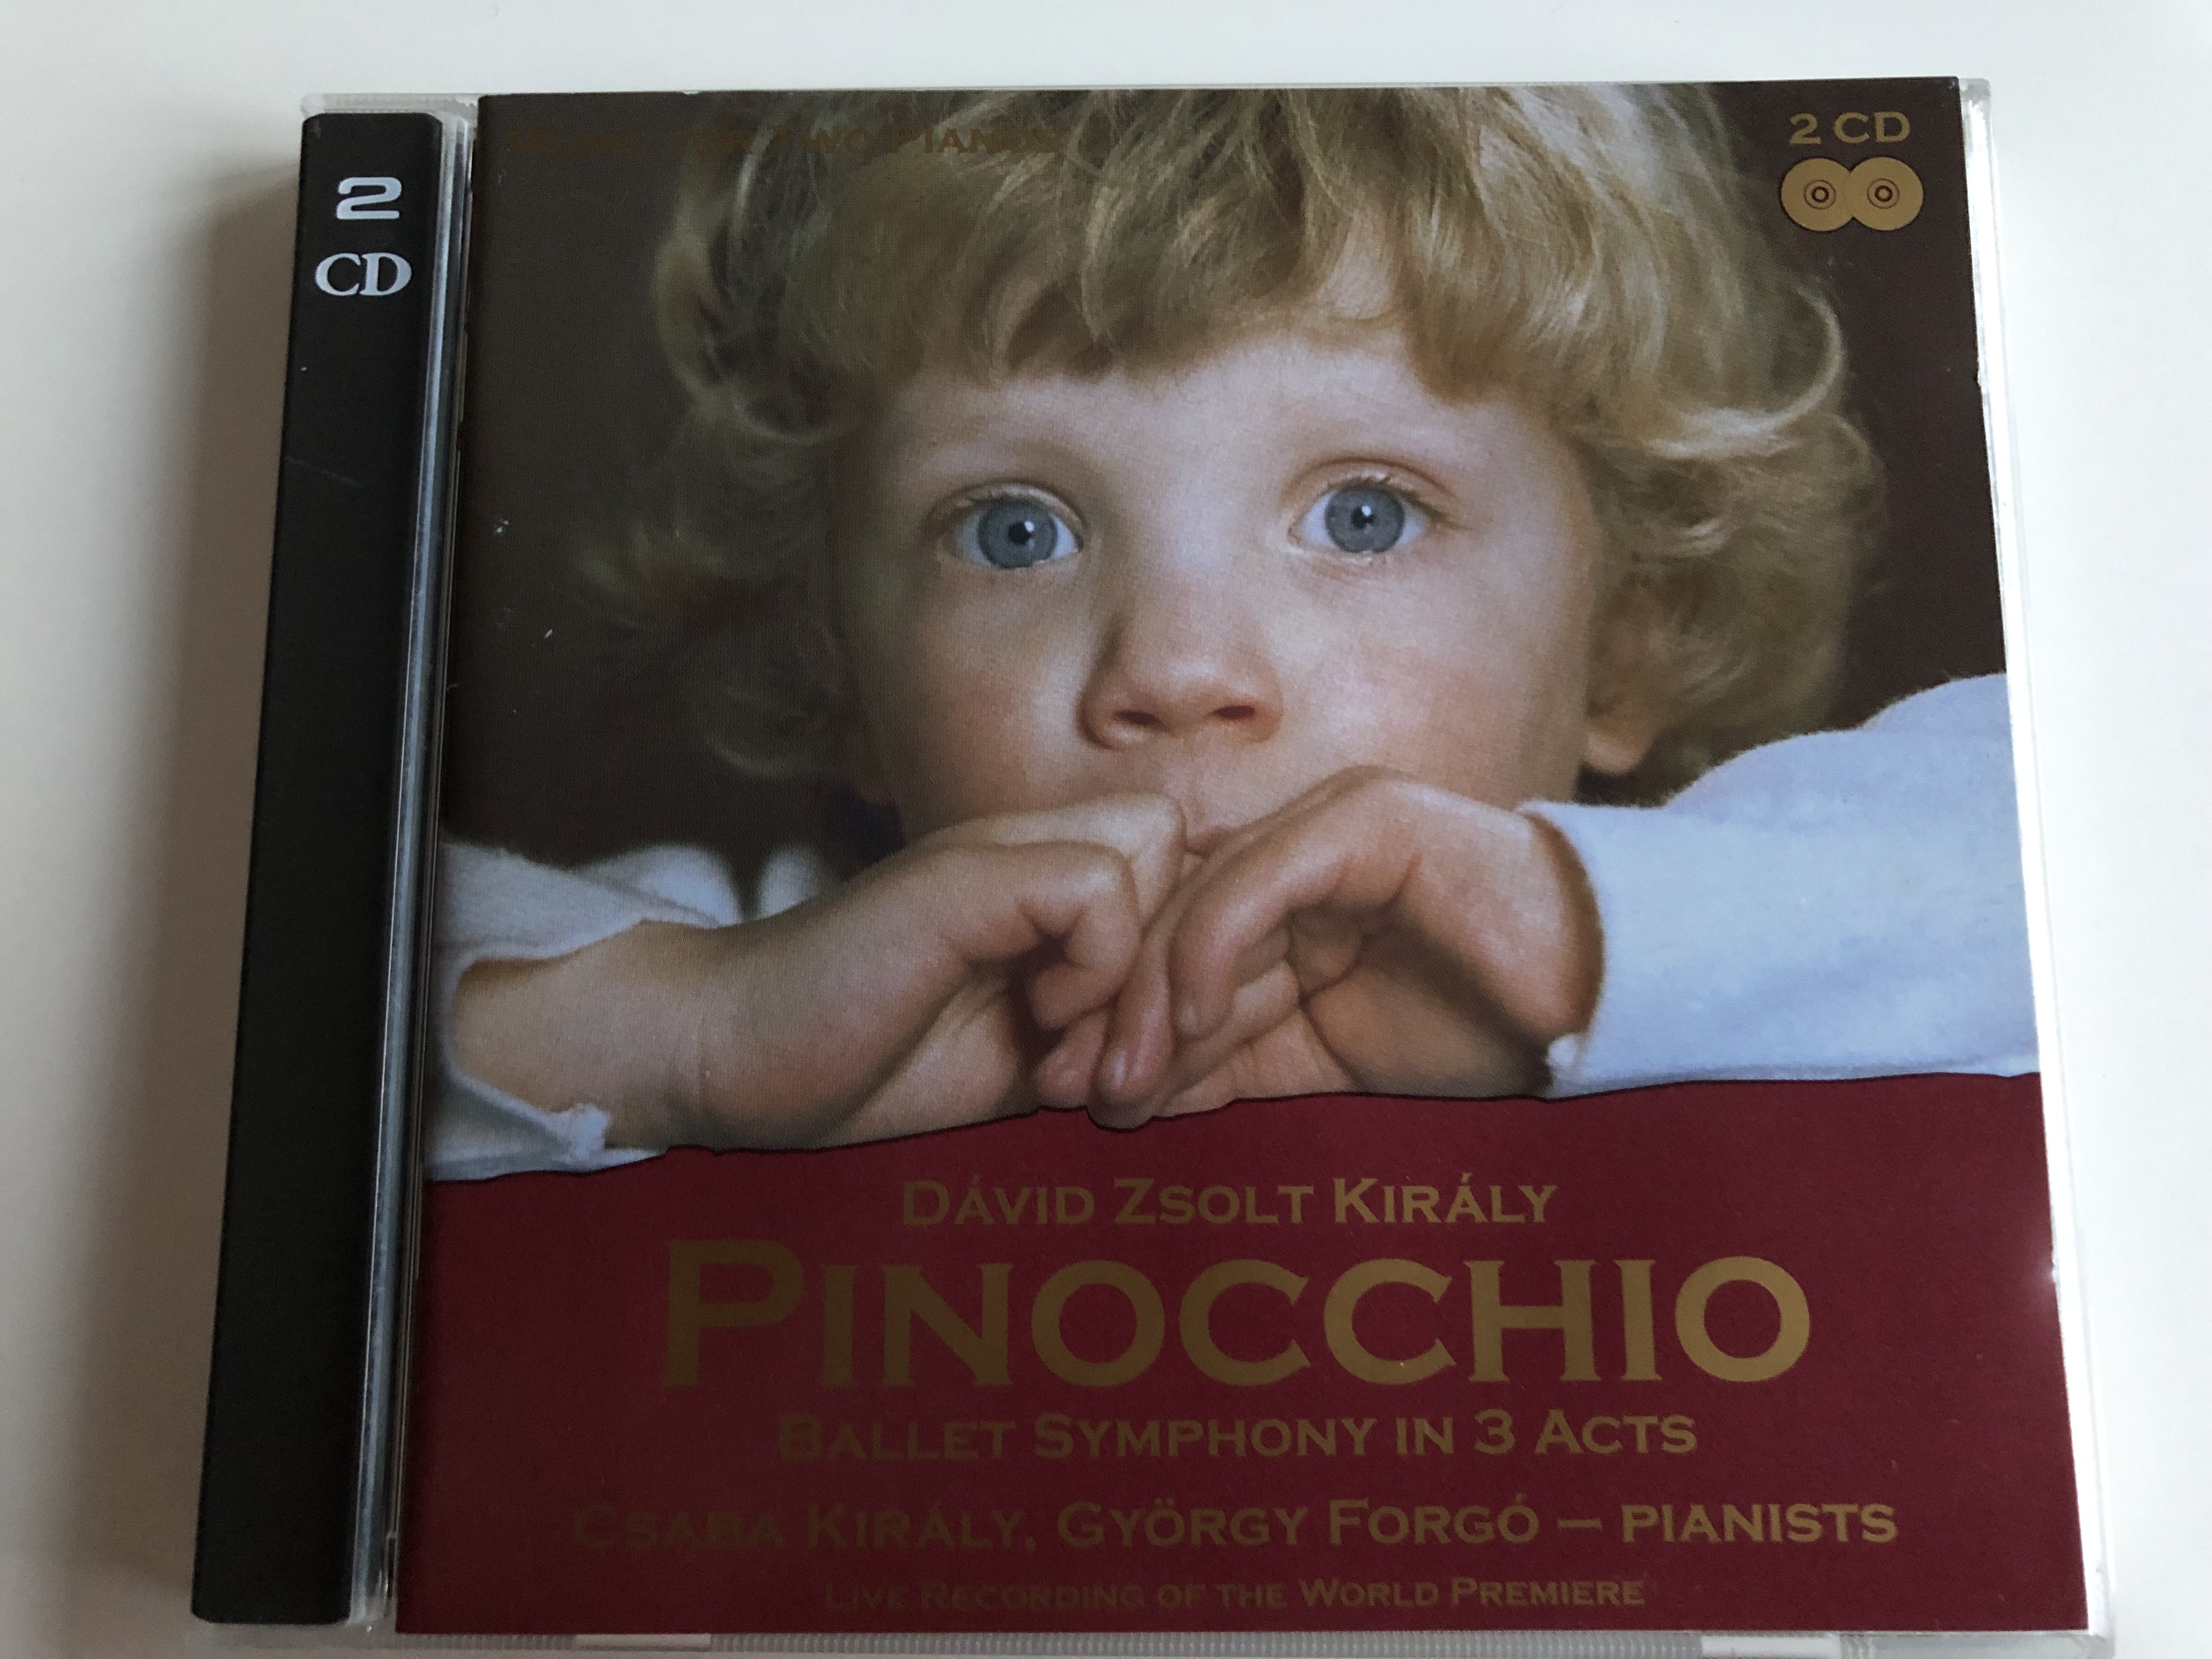 david-zsolt-kiraly-pinocchio-ballet-symphony-in-3-acts-csaba-kiraly-gyorgy-forgo-pianists-live-recording-of-the-world-premiere-kiraly-music-network-2x-audio-cd-2001-kmn-001-002-1-.jpg